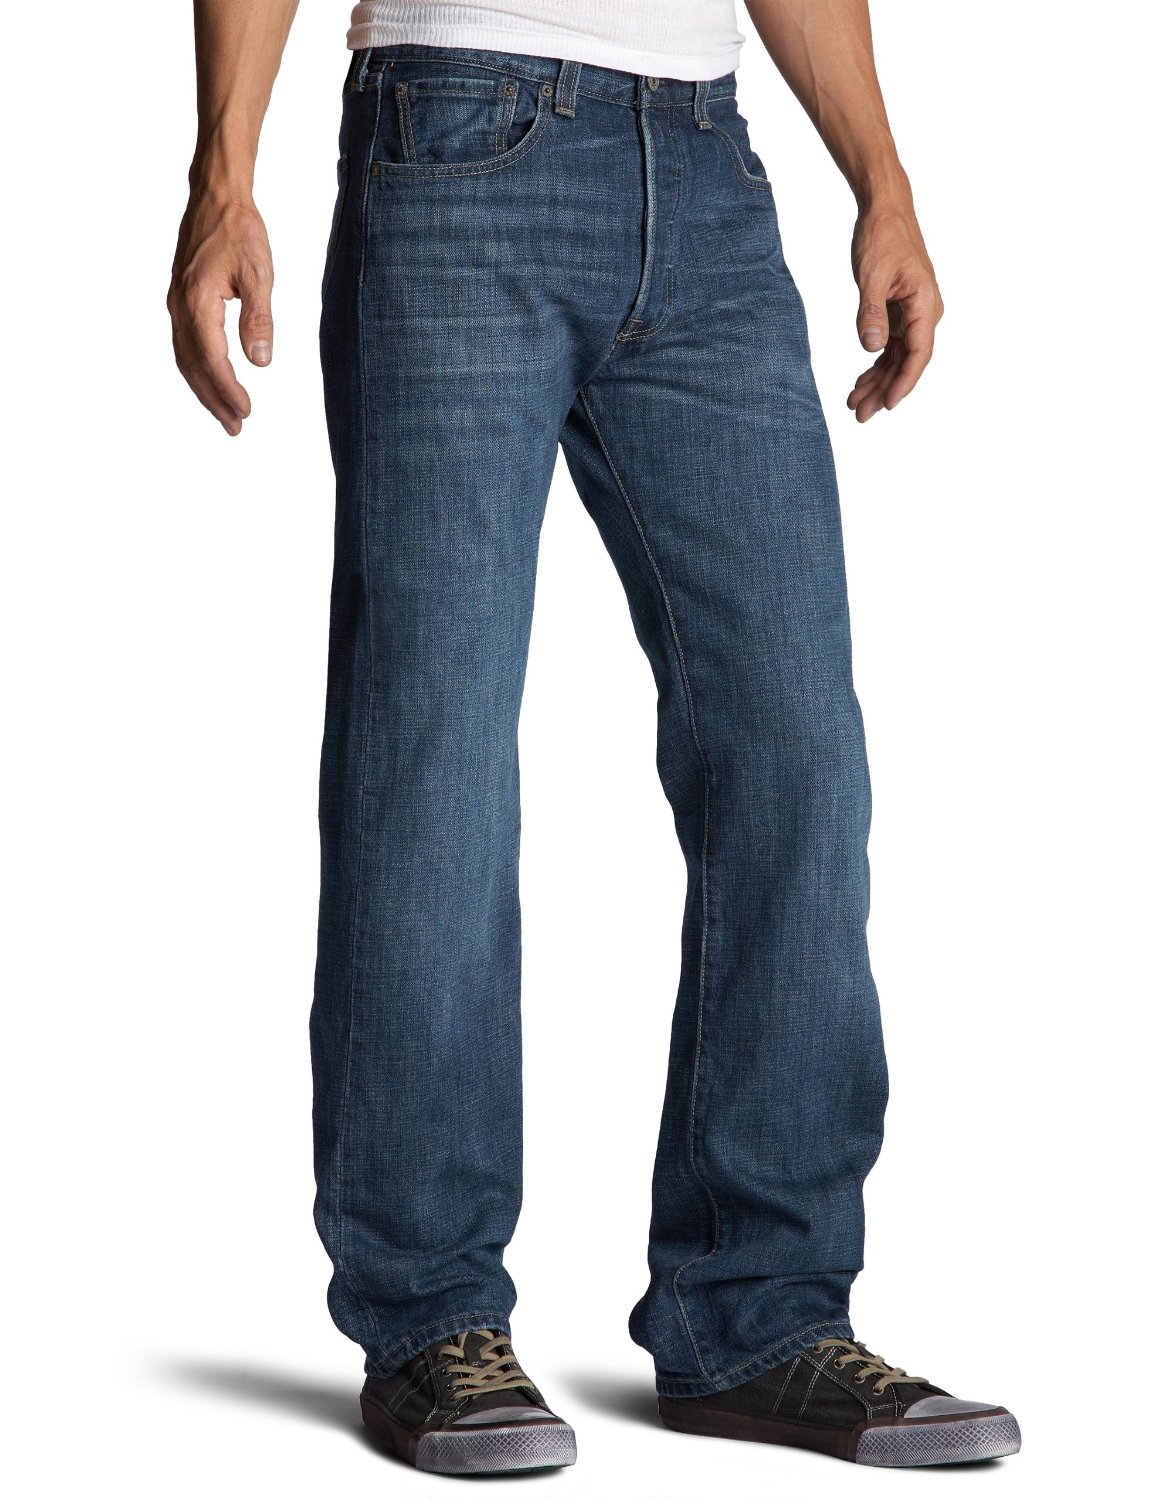 CLICK FOR THE BEST Prices ON Real LEVIs 501s ON AMAZON.COM